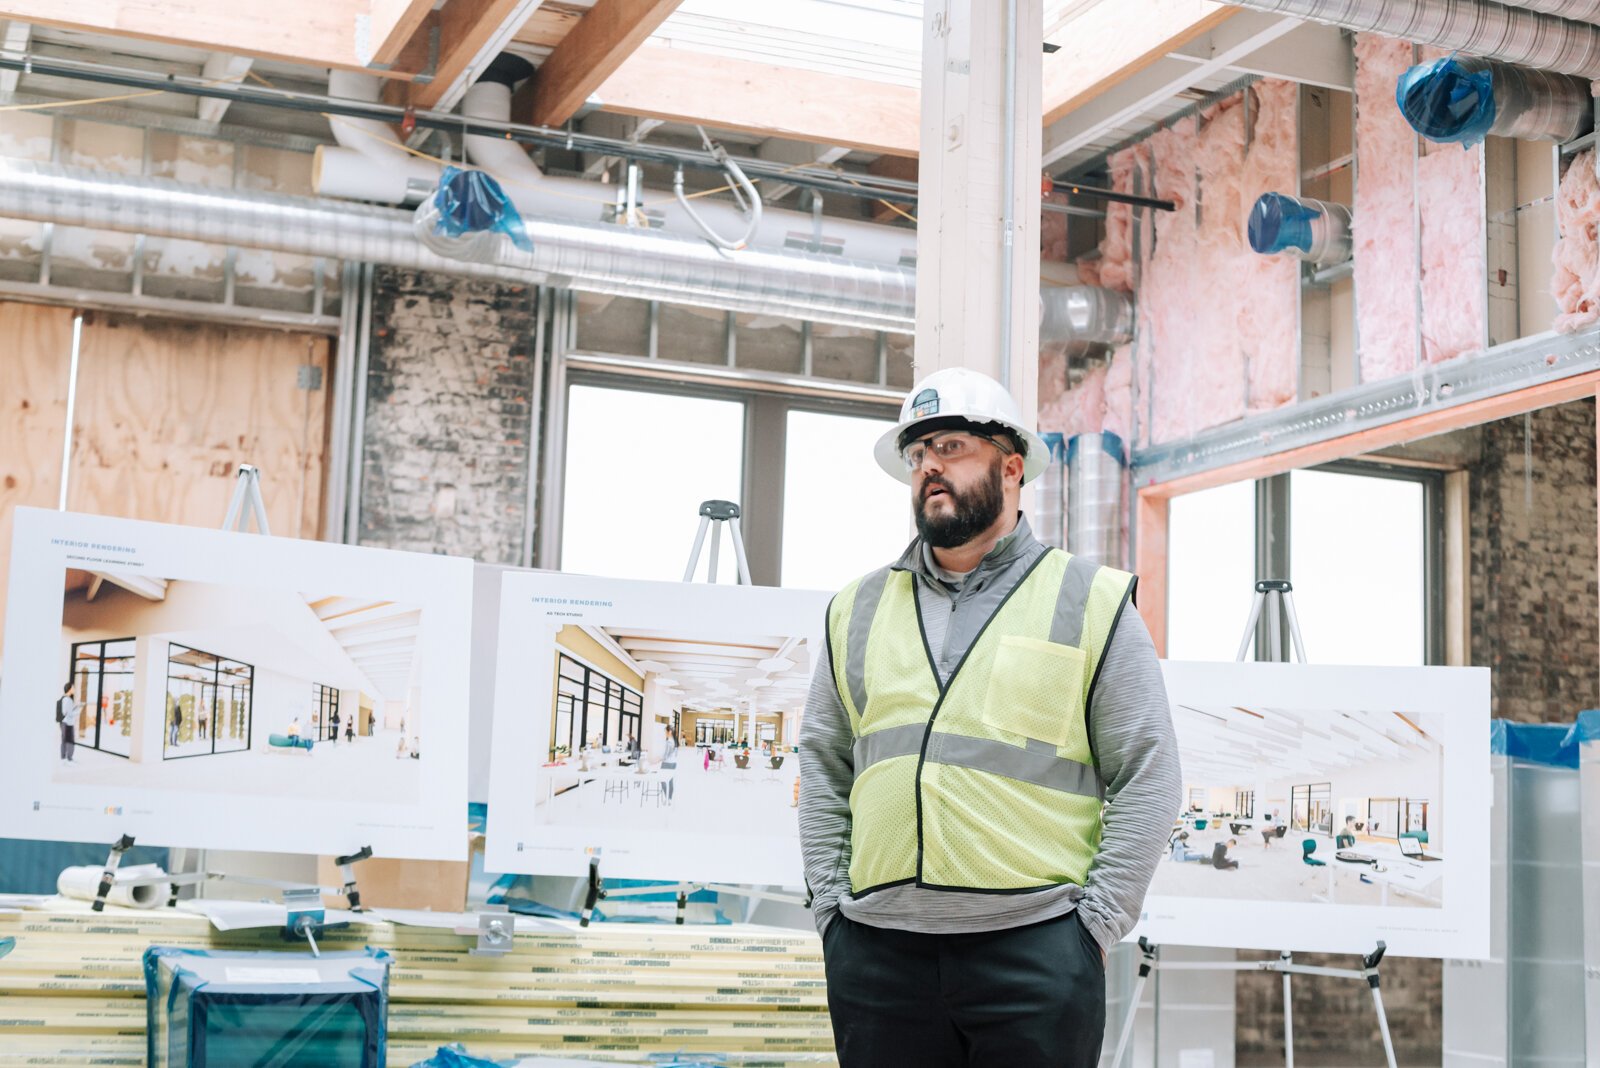 Riley Johnson, Director of the Amp Lab at Fort Wayne Community Schools, speaks with members of the media inside the Amp Lab's future space in Building 31 of Electric Works. (December 2021) 